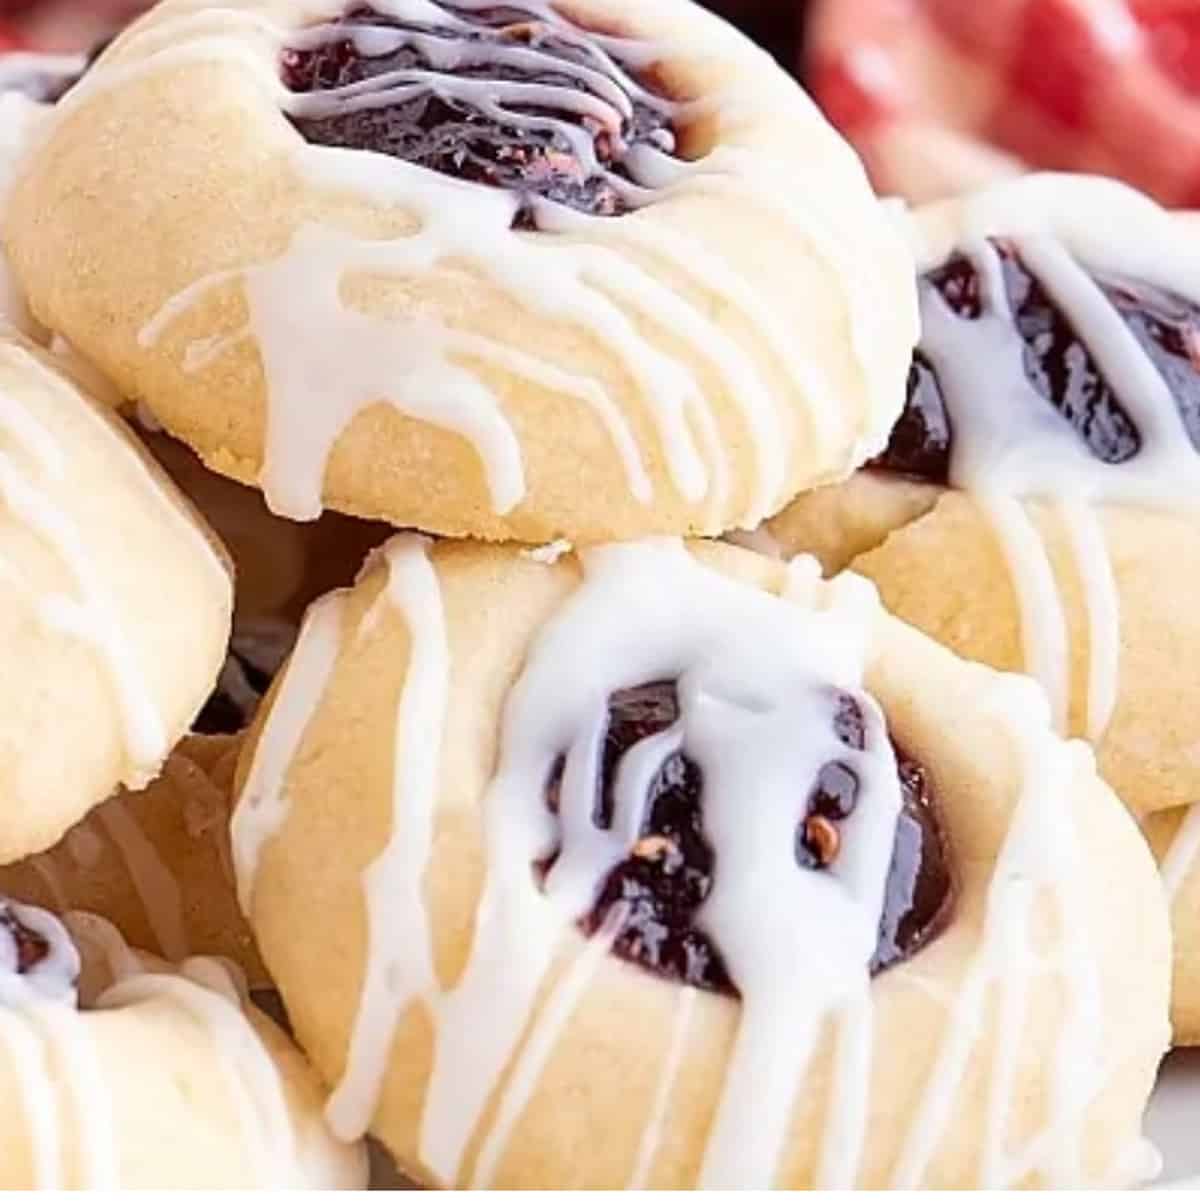 A stack of thumbprint cookies with vanilla glaze.